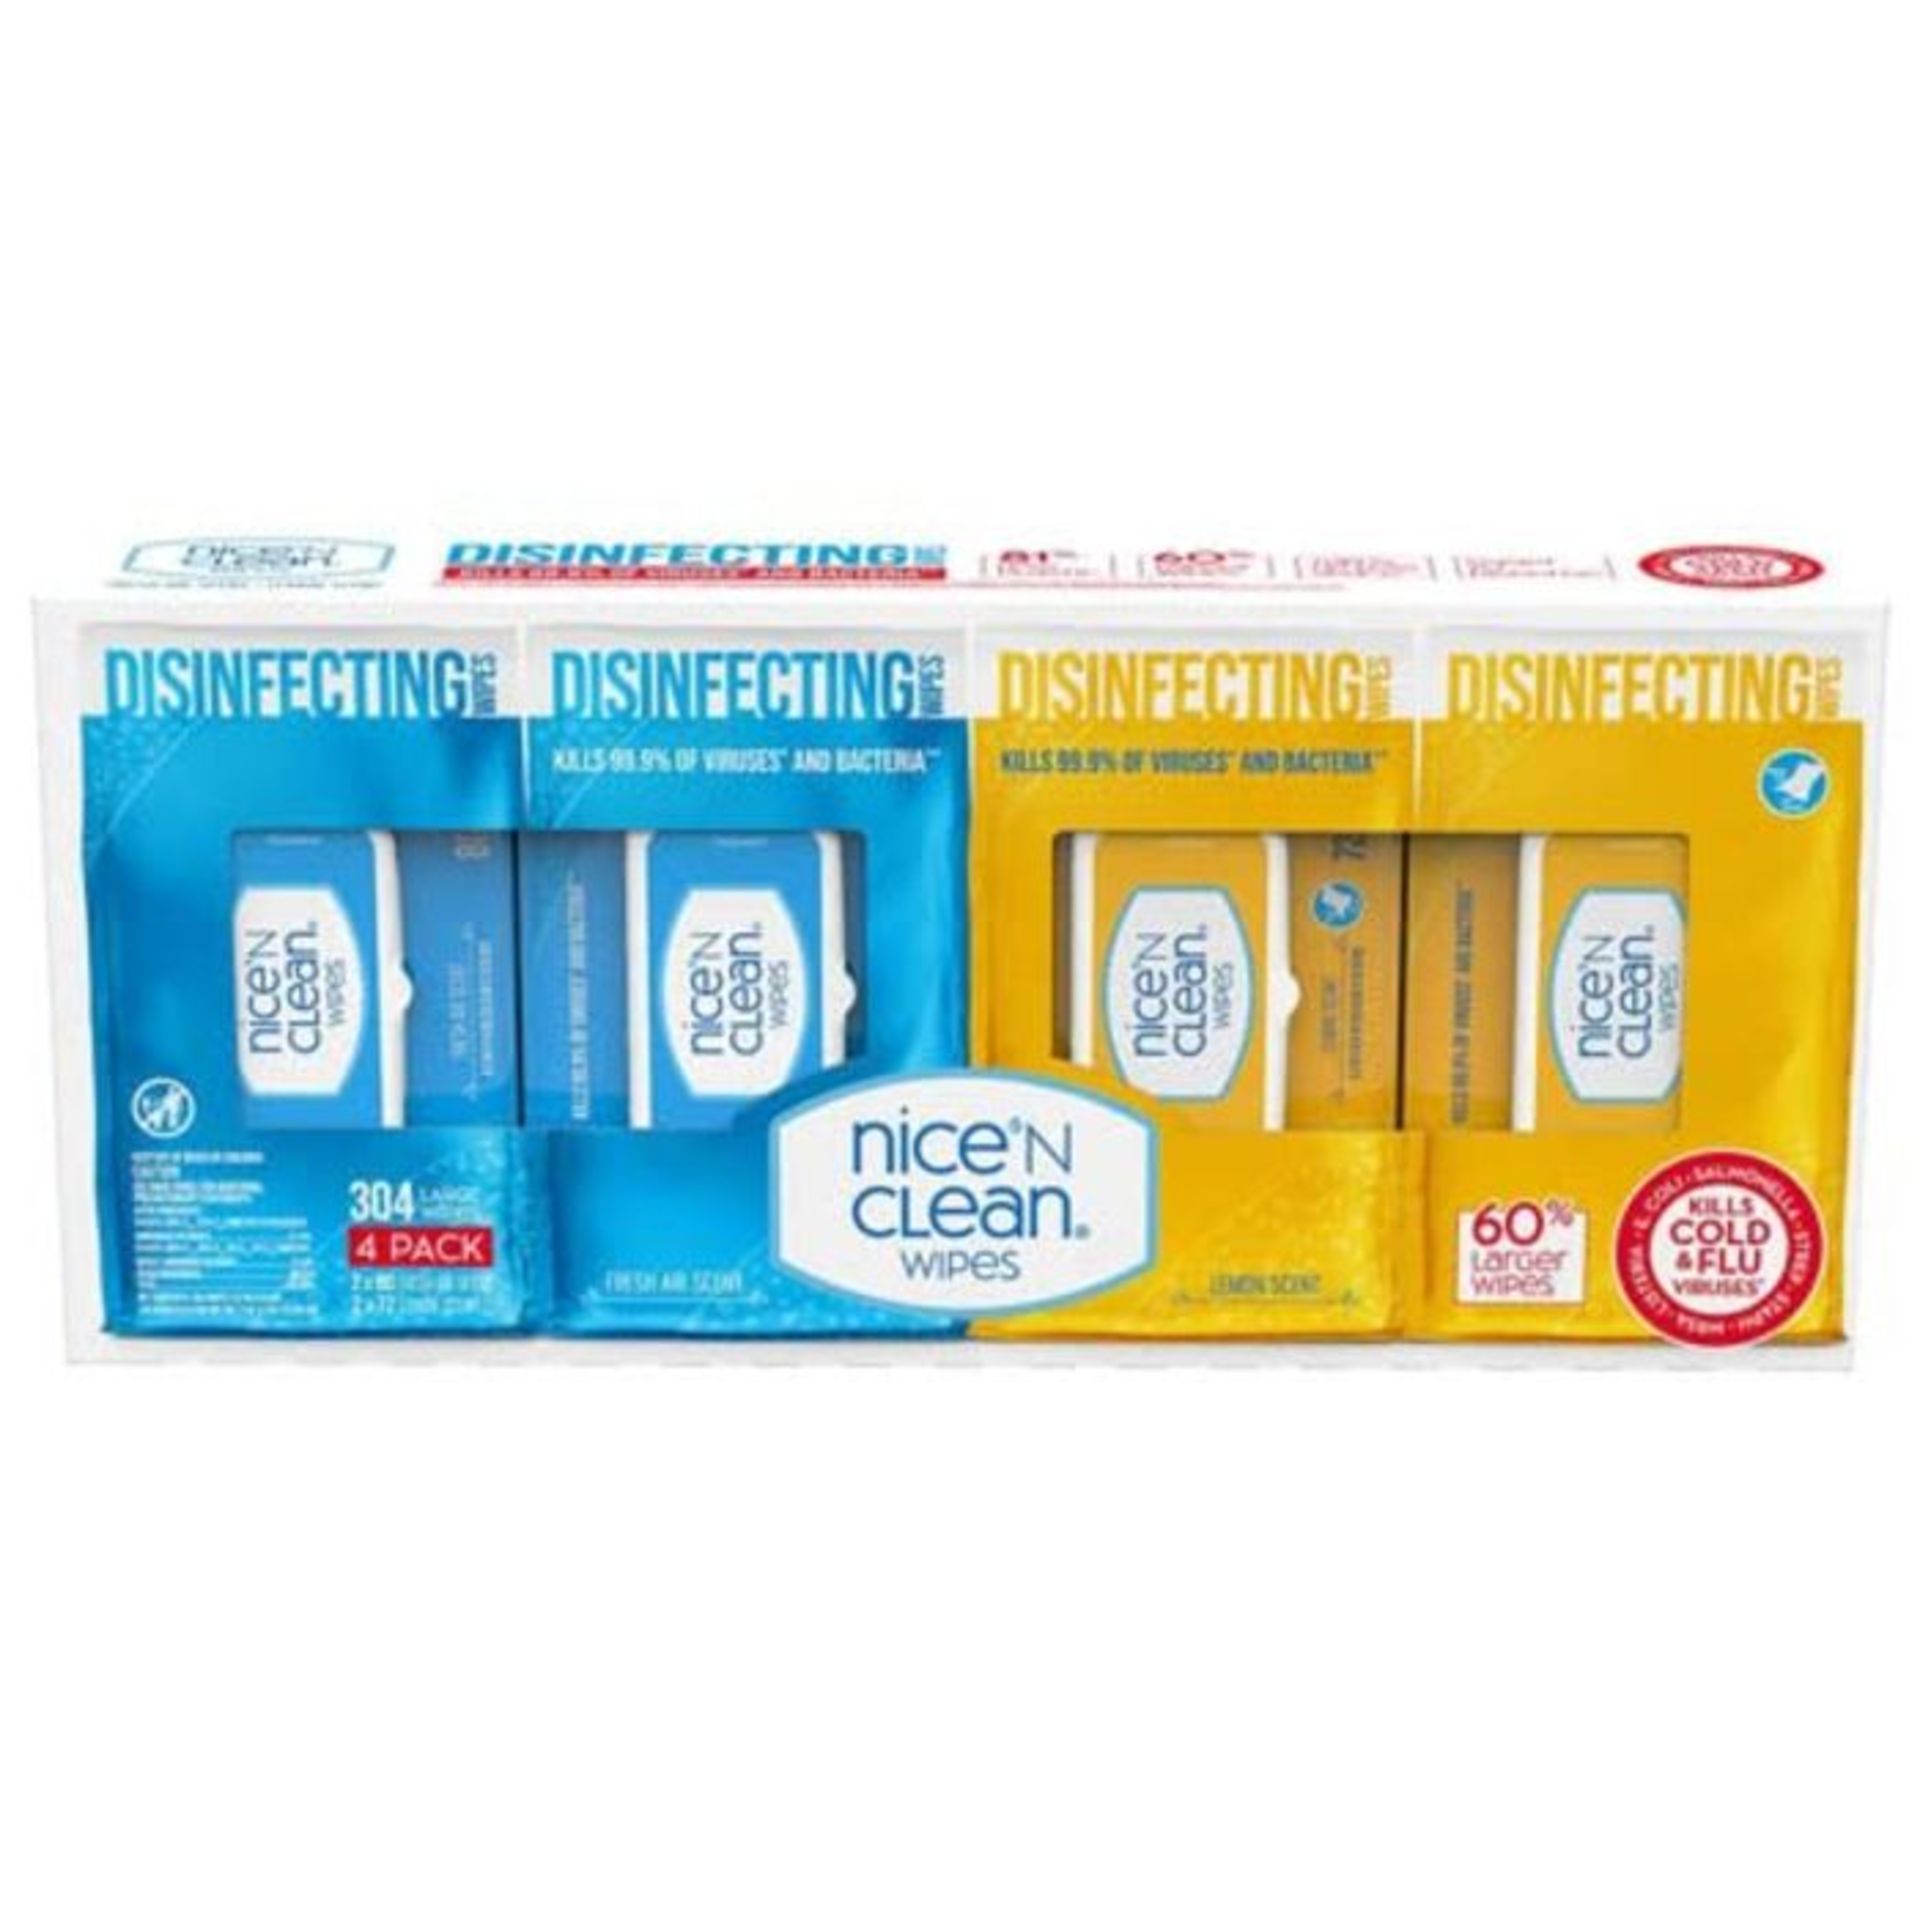 Nice 'N Clean Disinfecting Surface Wipes 304 Count | Cleans & Disinfects Home & Kitche